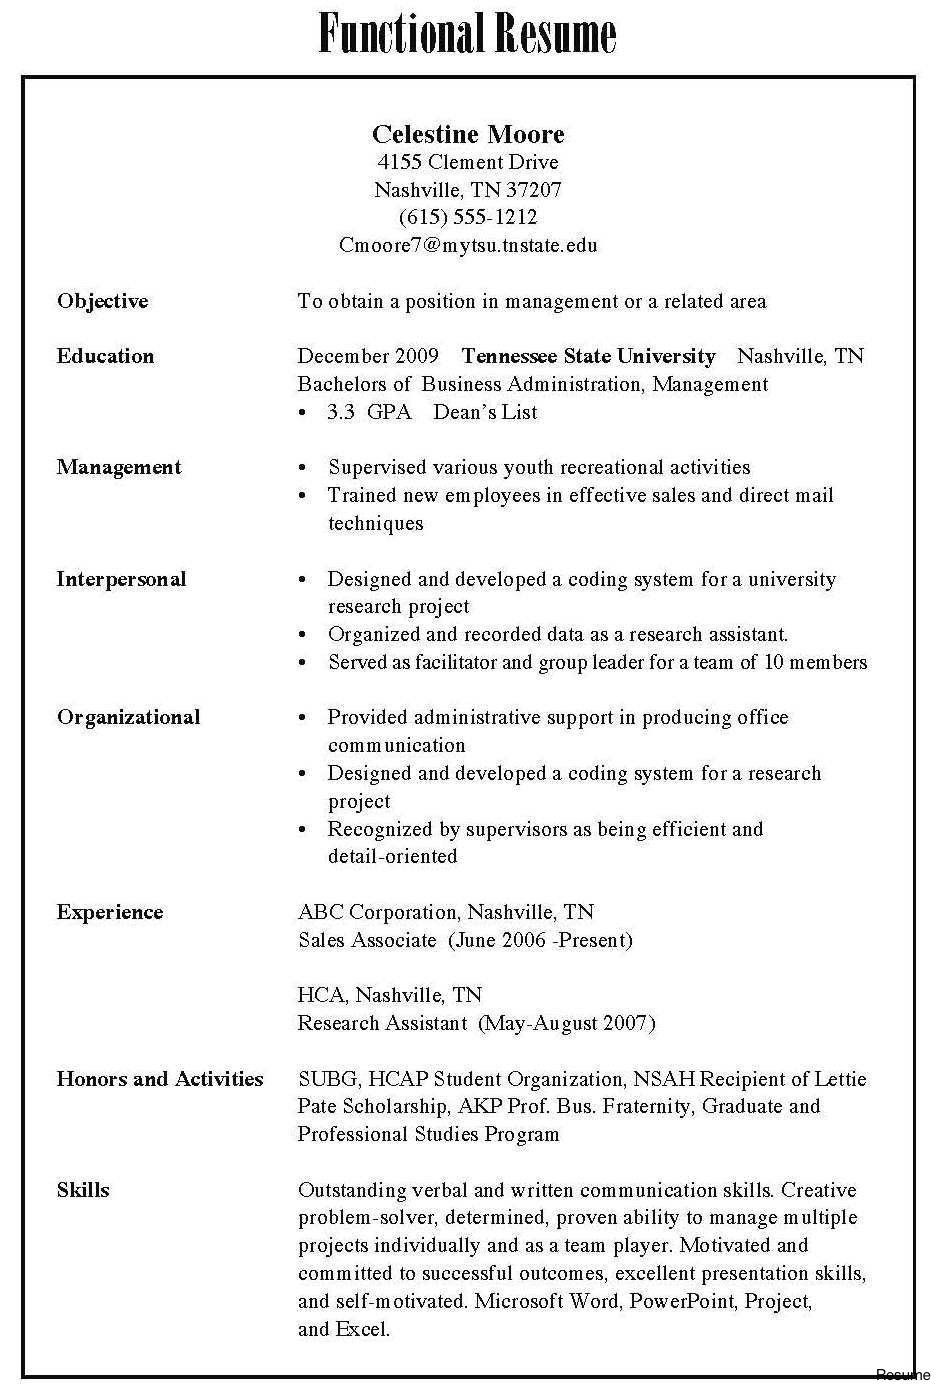 Samples Of Different Styles Of Resumes 3 Types Resume formats Resume format